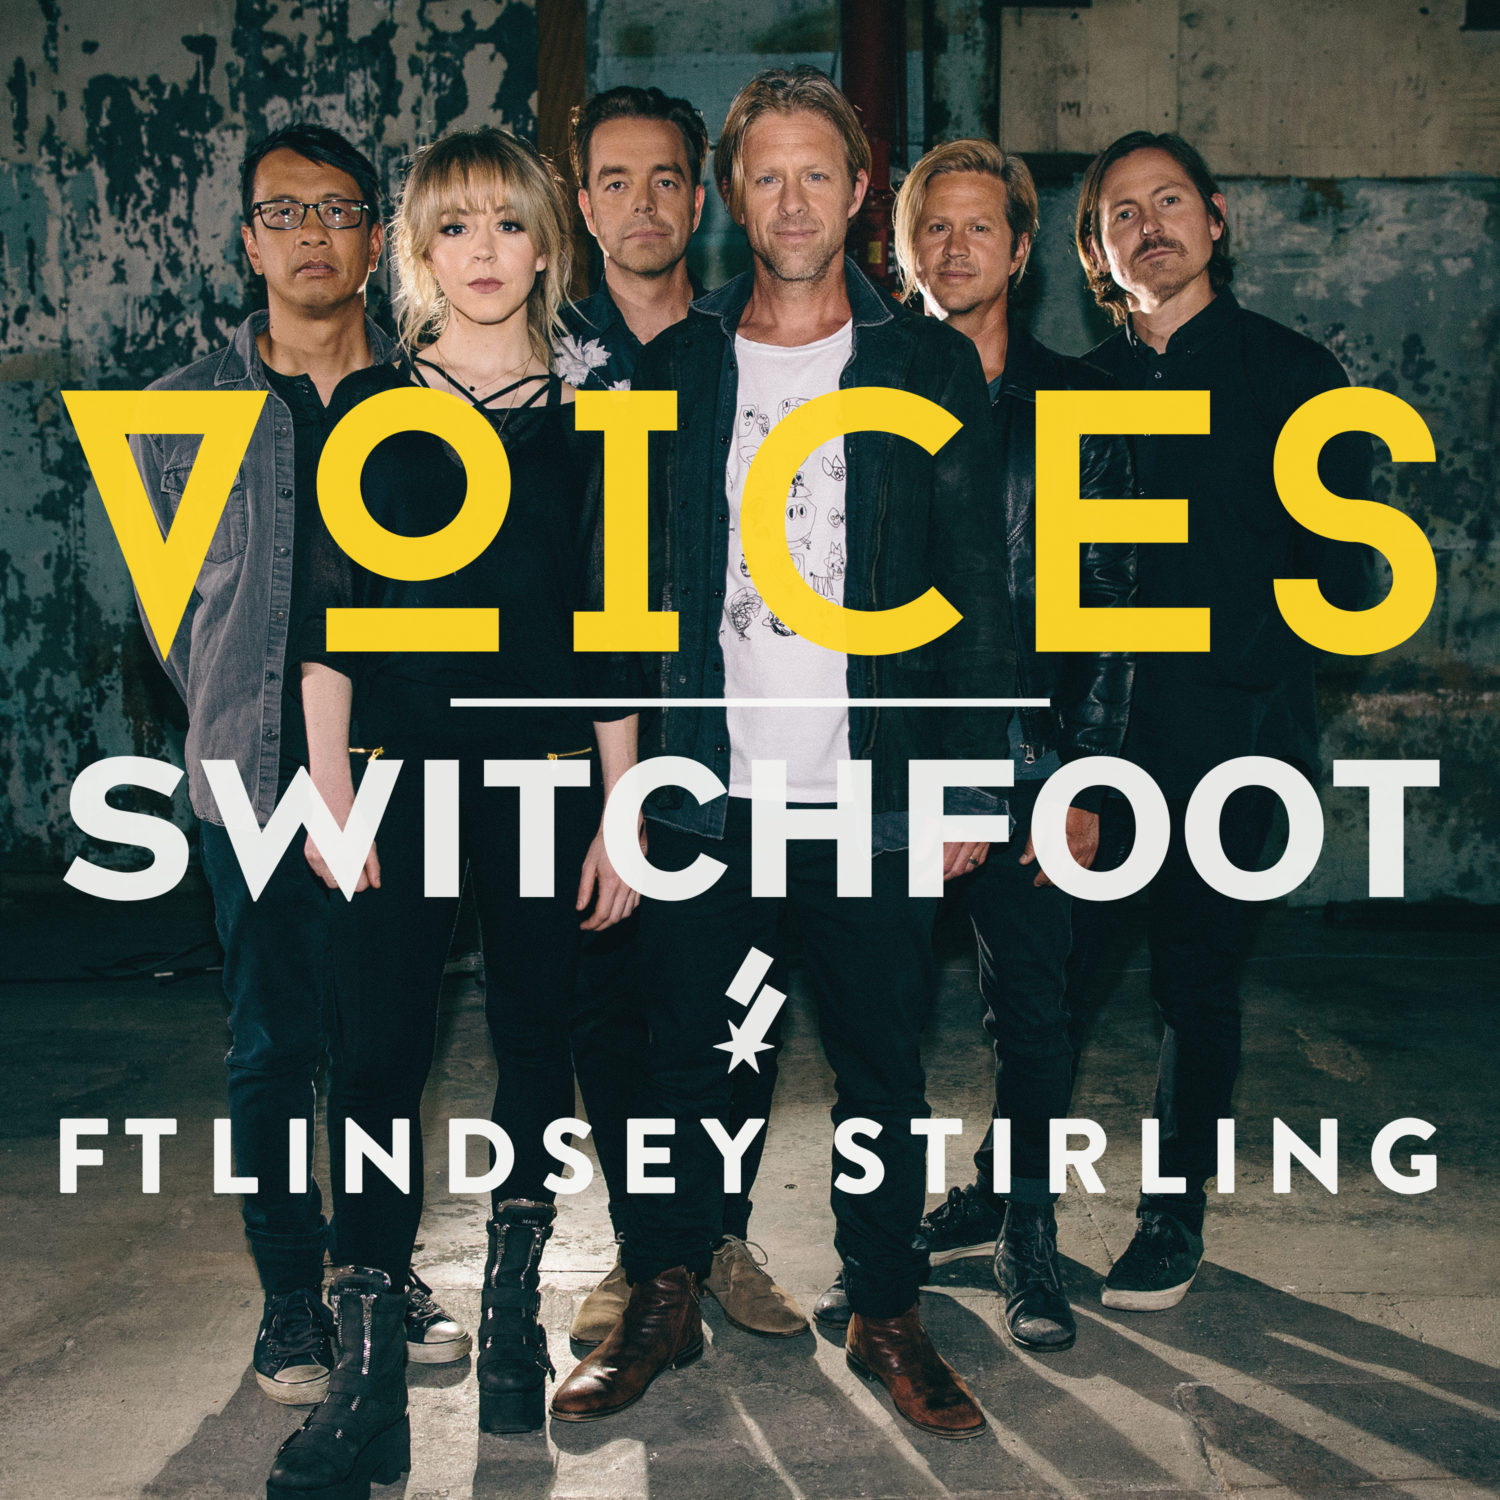 switchfoot-voices-featuring-lindsey-stirling